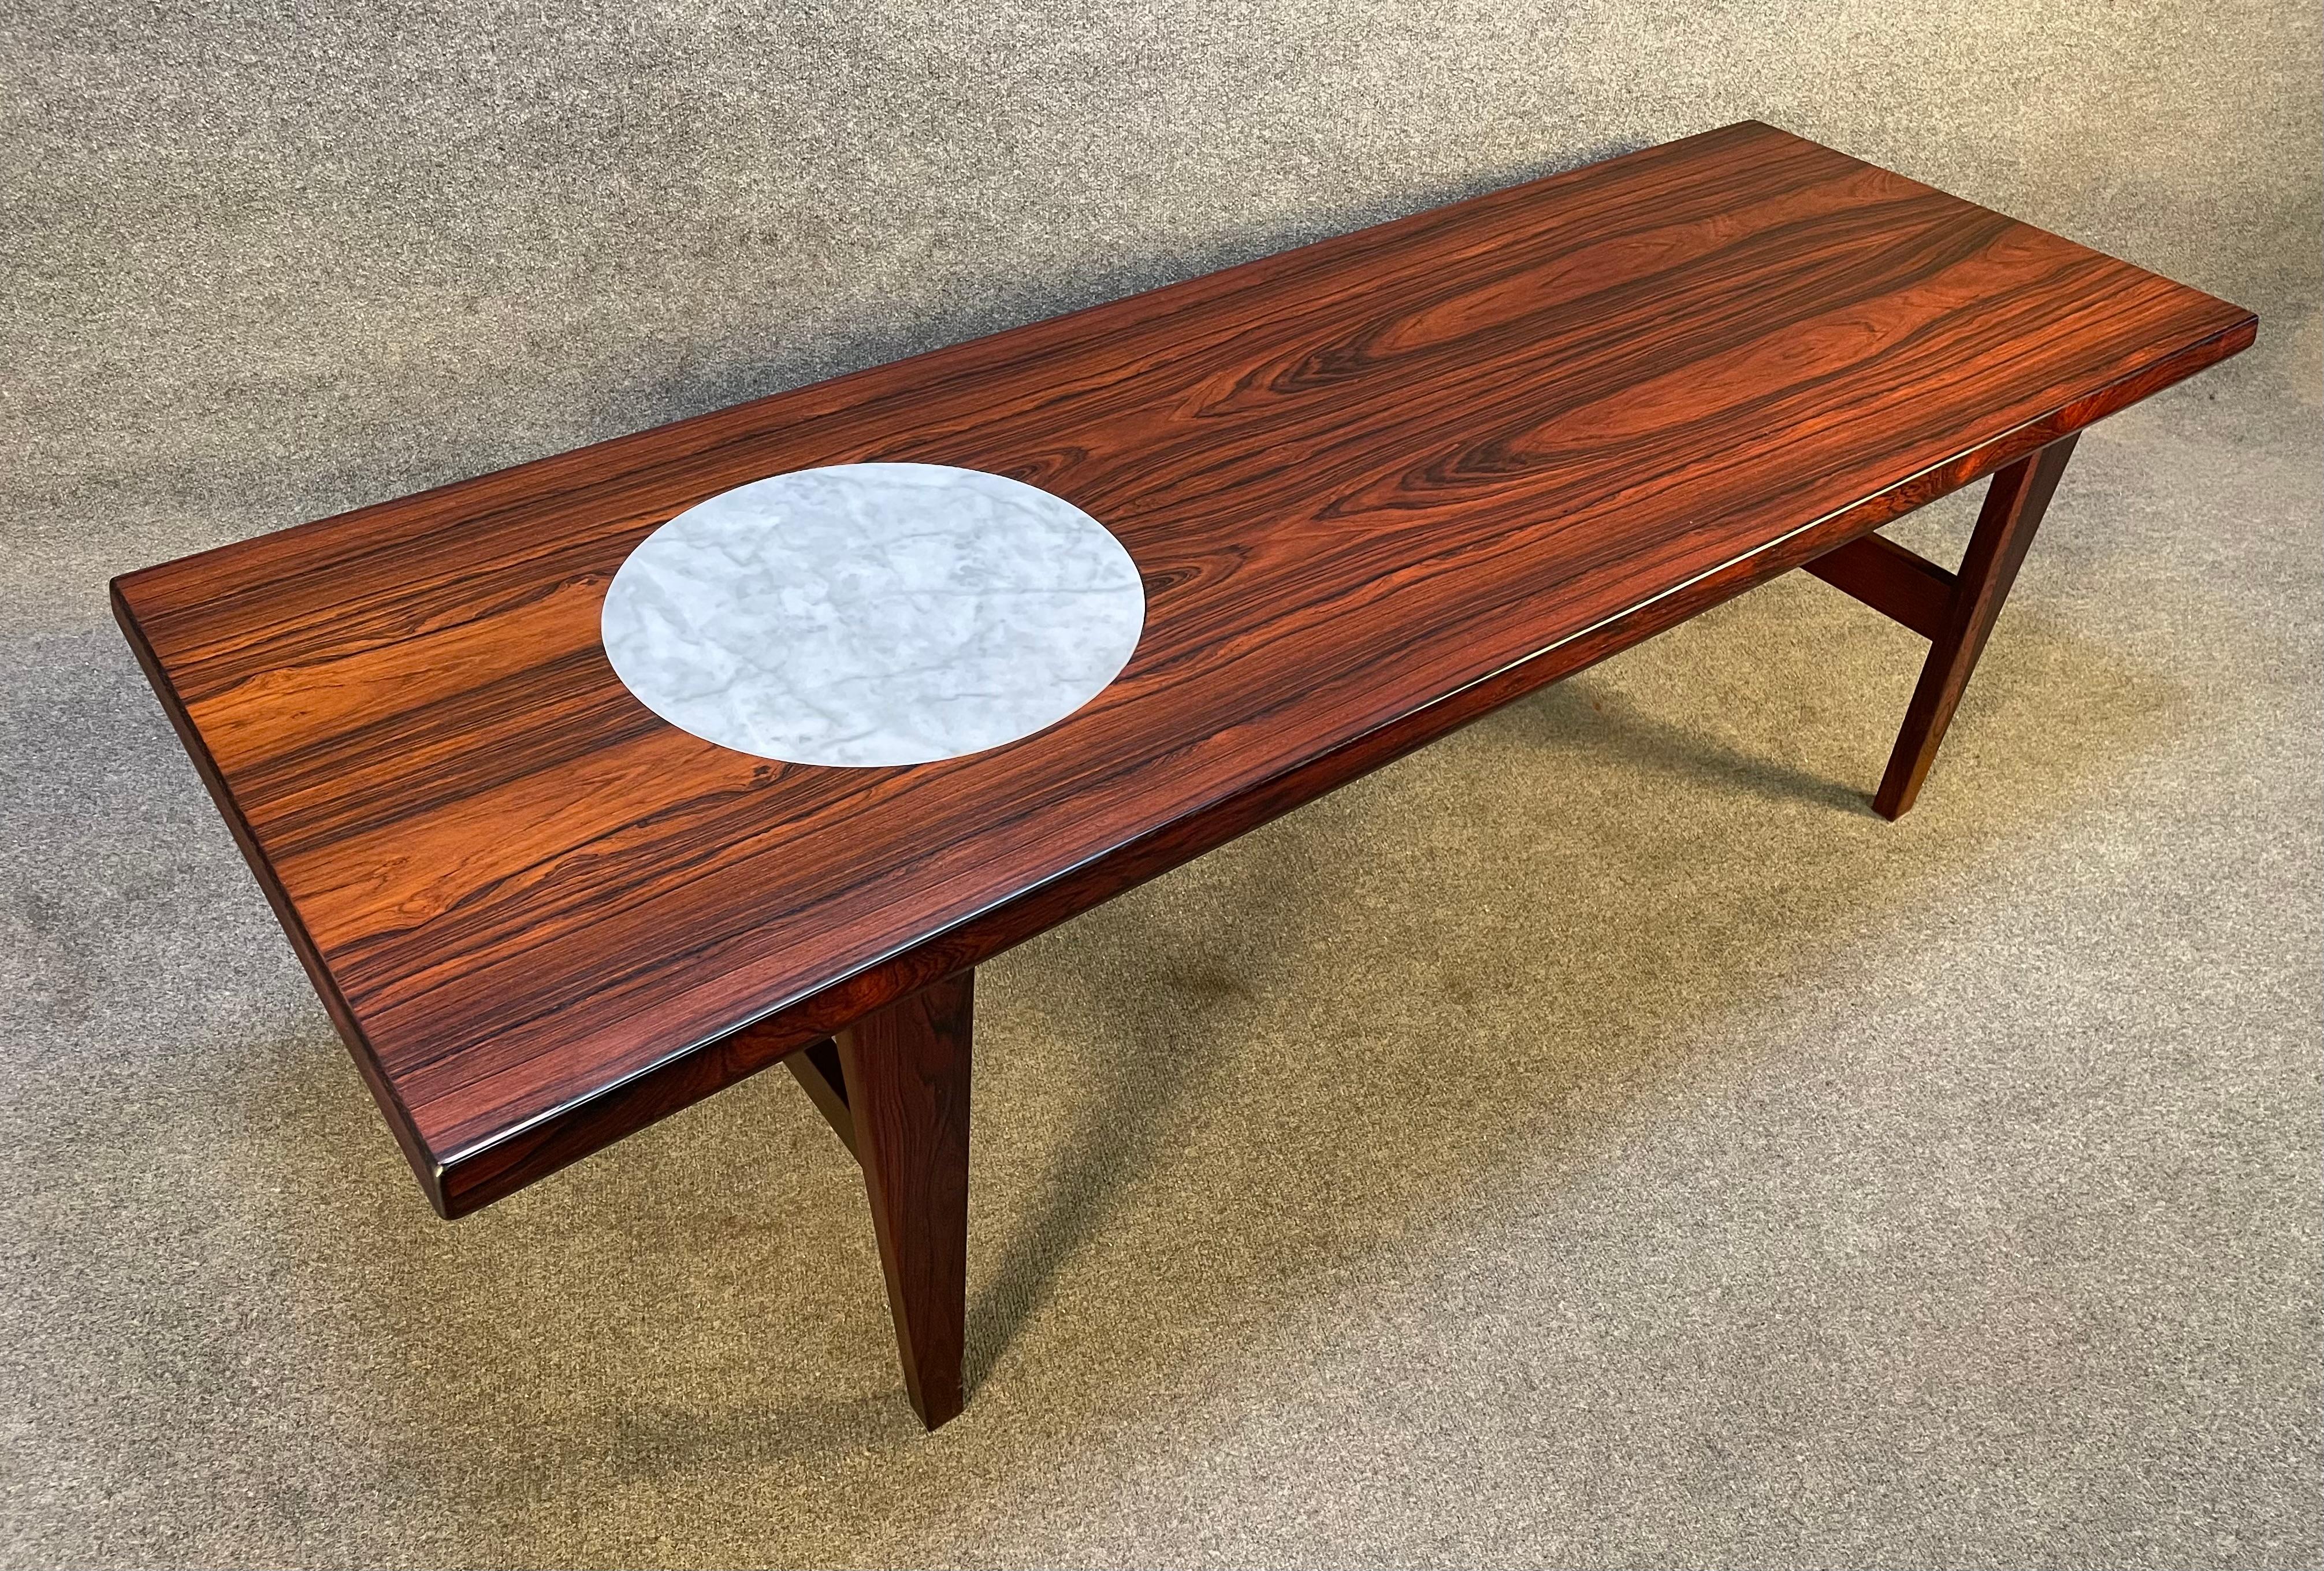 Vintage Danish Mid-Century Modern Rosewood and Marble Coffee Table For Sale 4